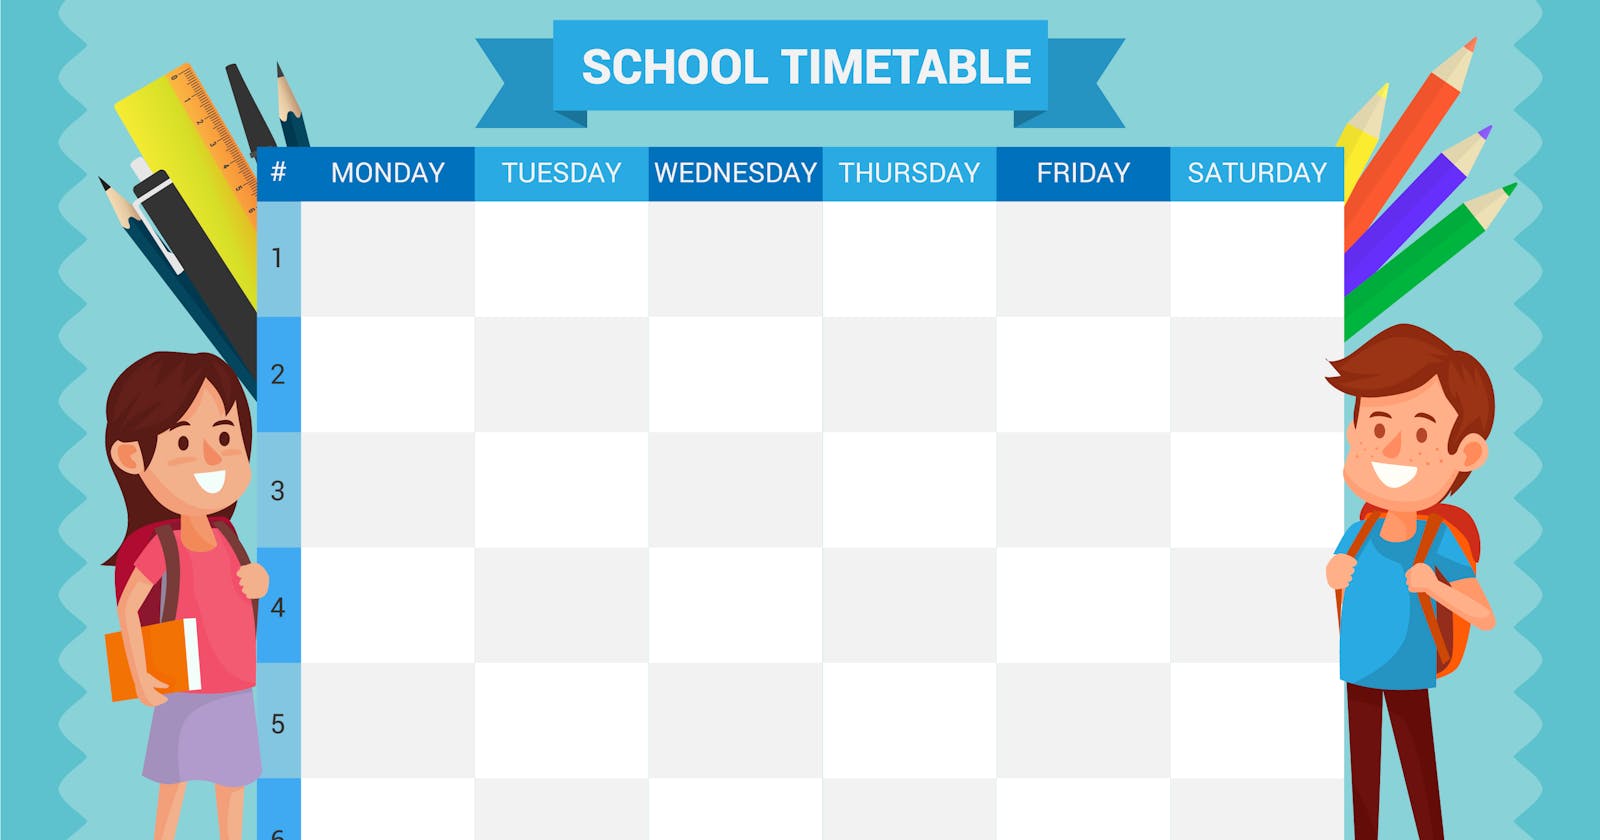 Build a school timetable with python